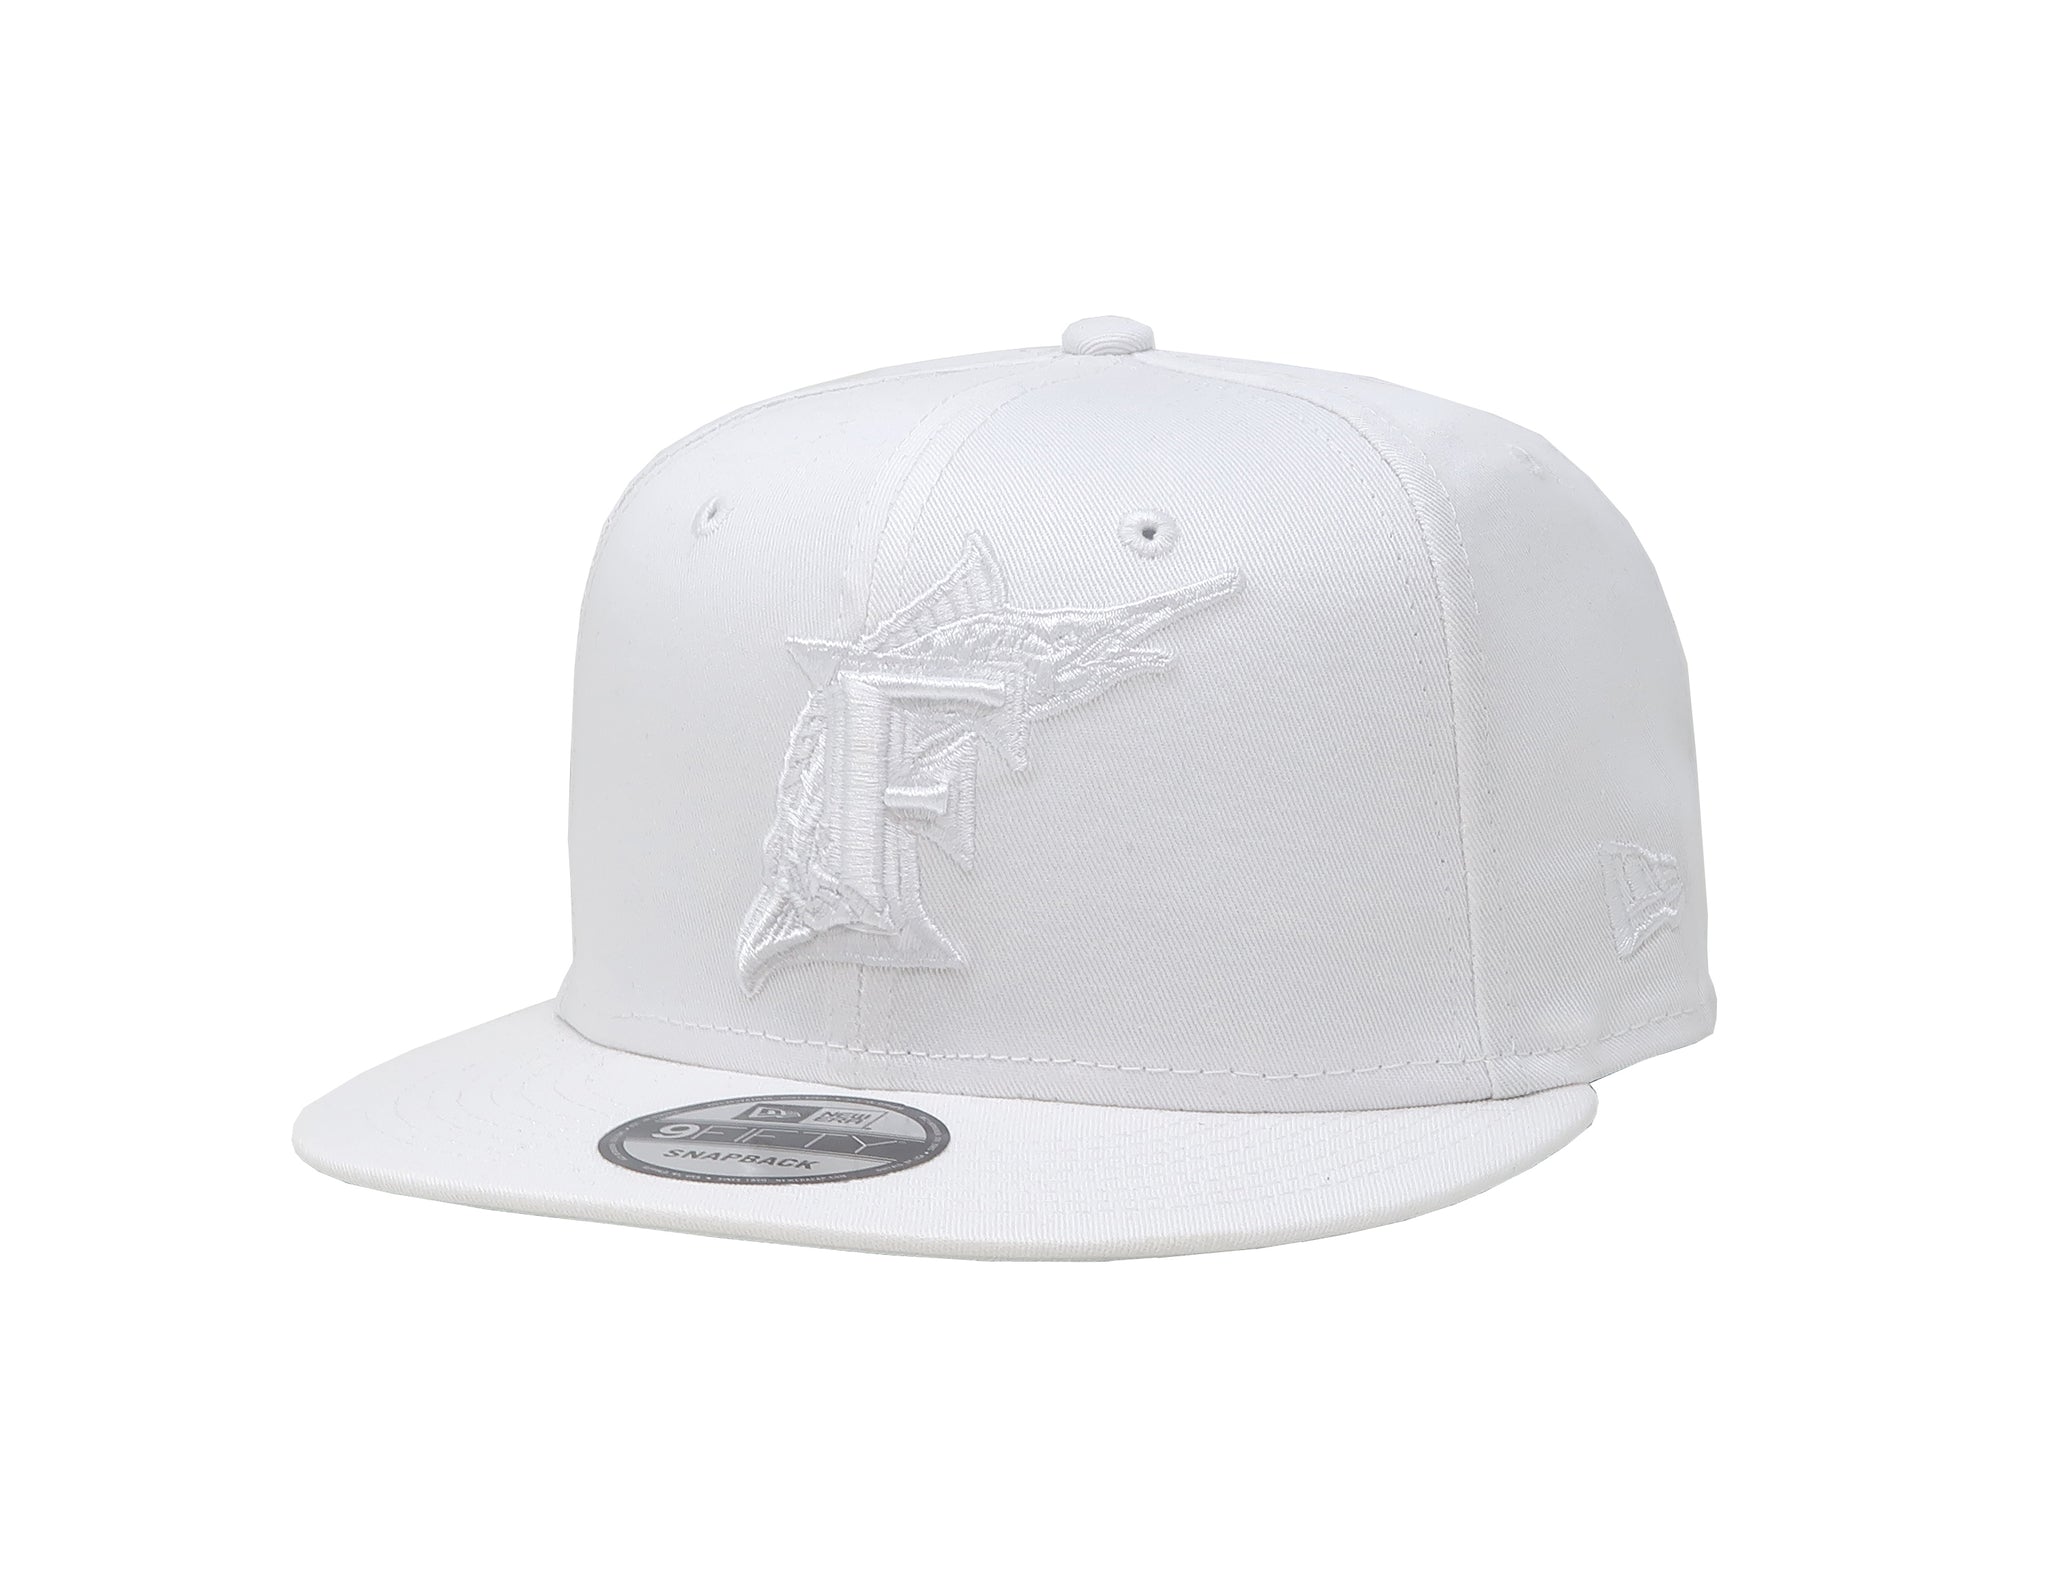 New Era 9Fifty MLB Florida Marlins Cooperstown "F" Basic White Snapback Cap